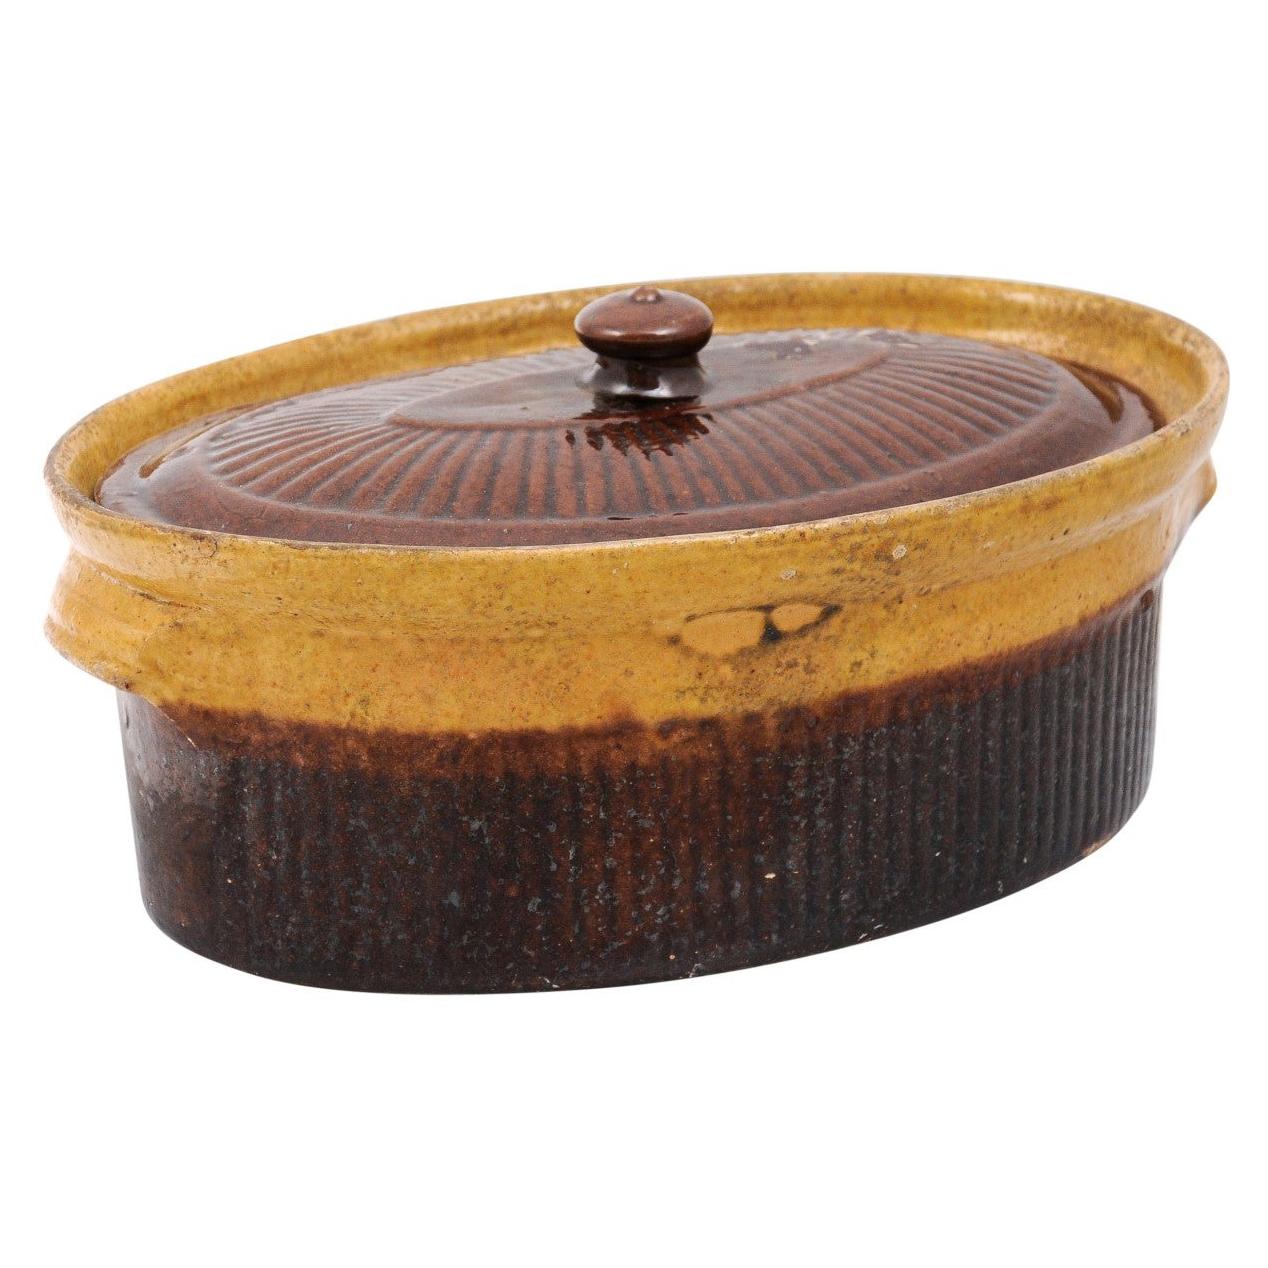 Rustic French 19th Century Covered Pâté Terrine with Brown and Gold Glaze For Sale